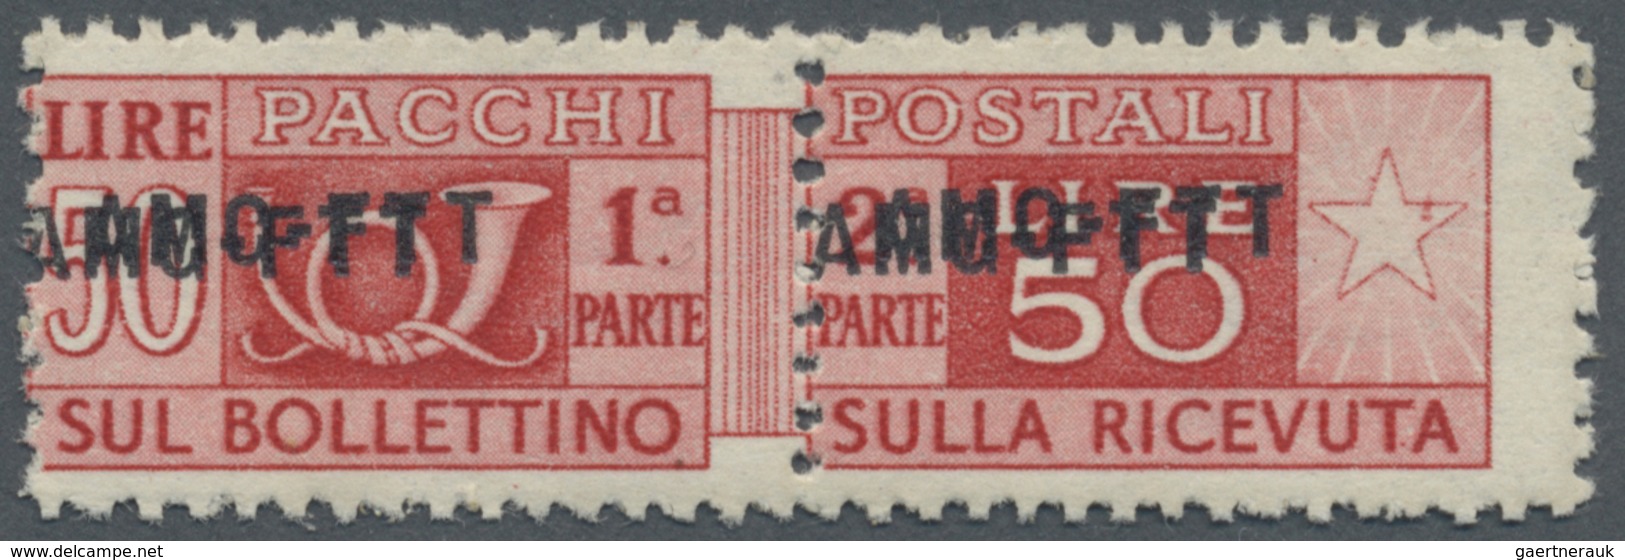 ** Triest - Zone A - Paketmarken: 1950, 50l. Red Showing Variety "double (shifted) Overprint", Unmounte - Colis Postaux/concession